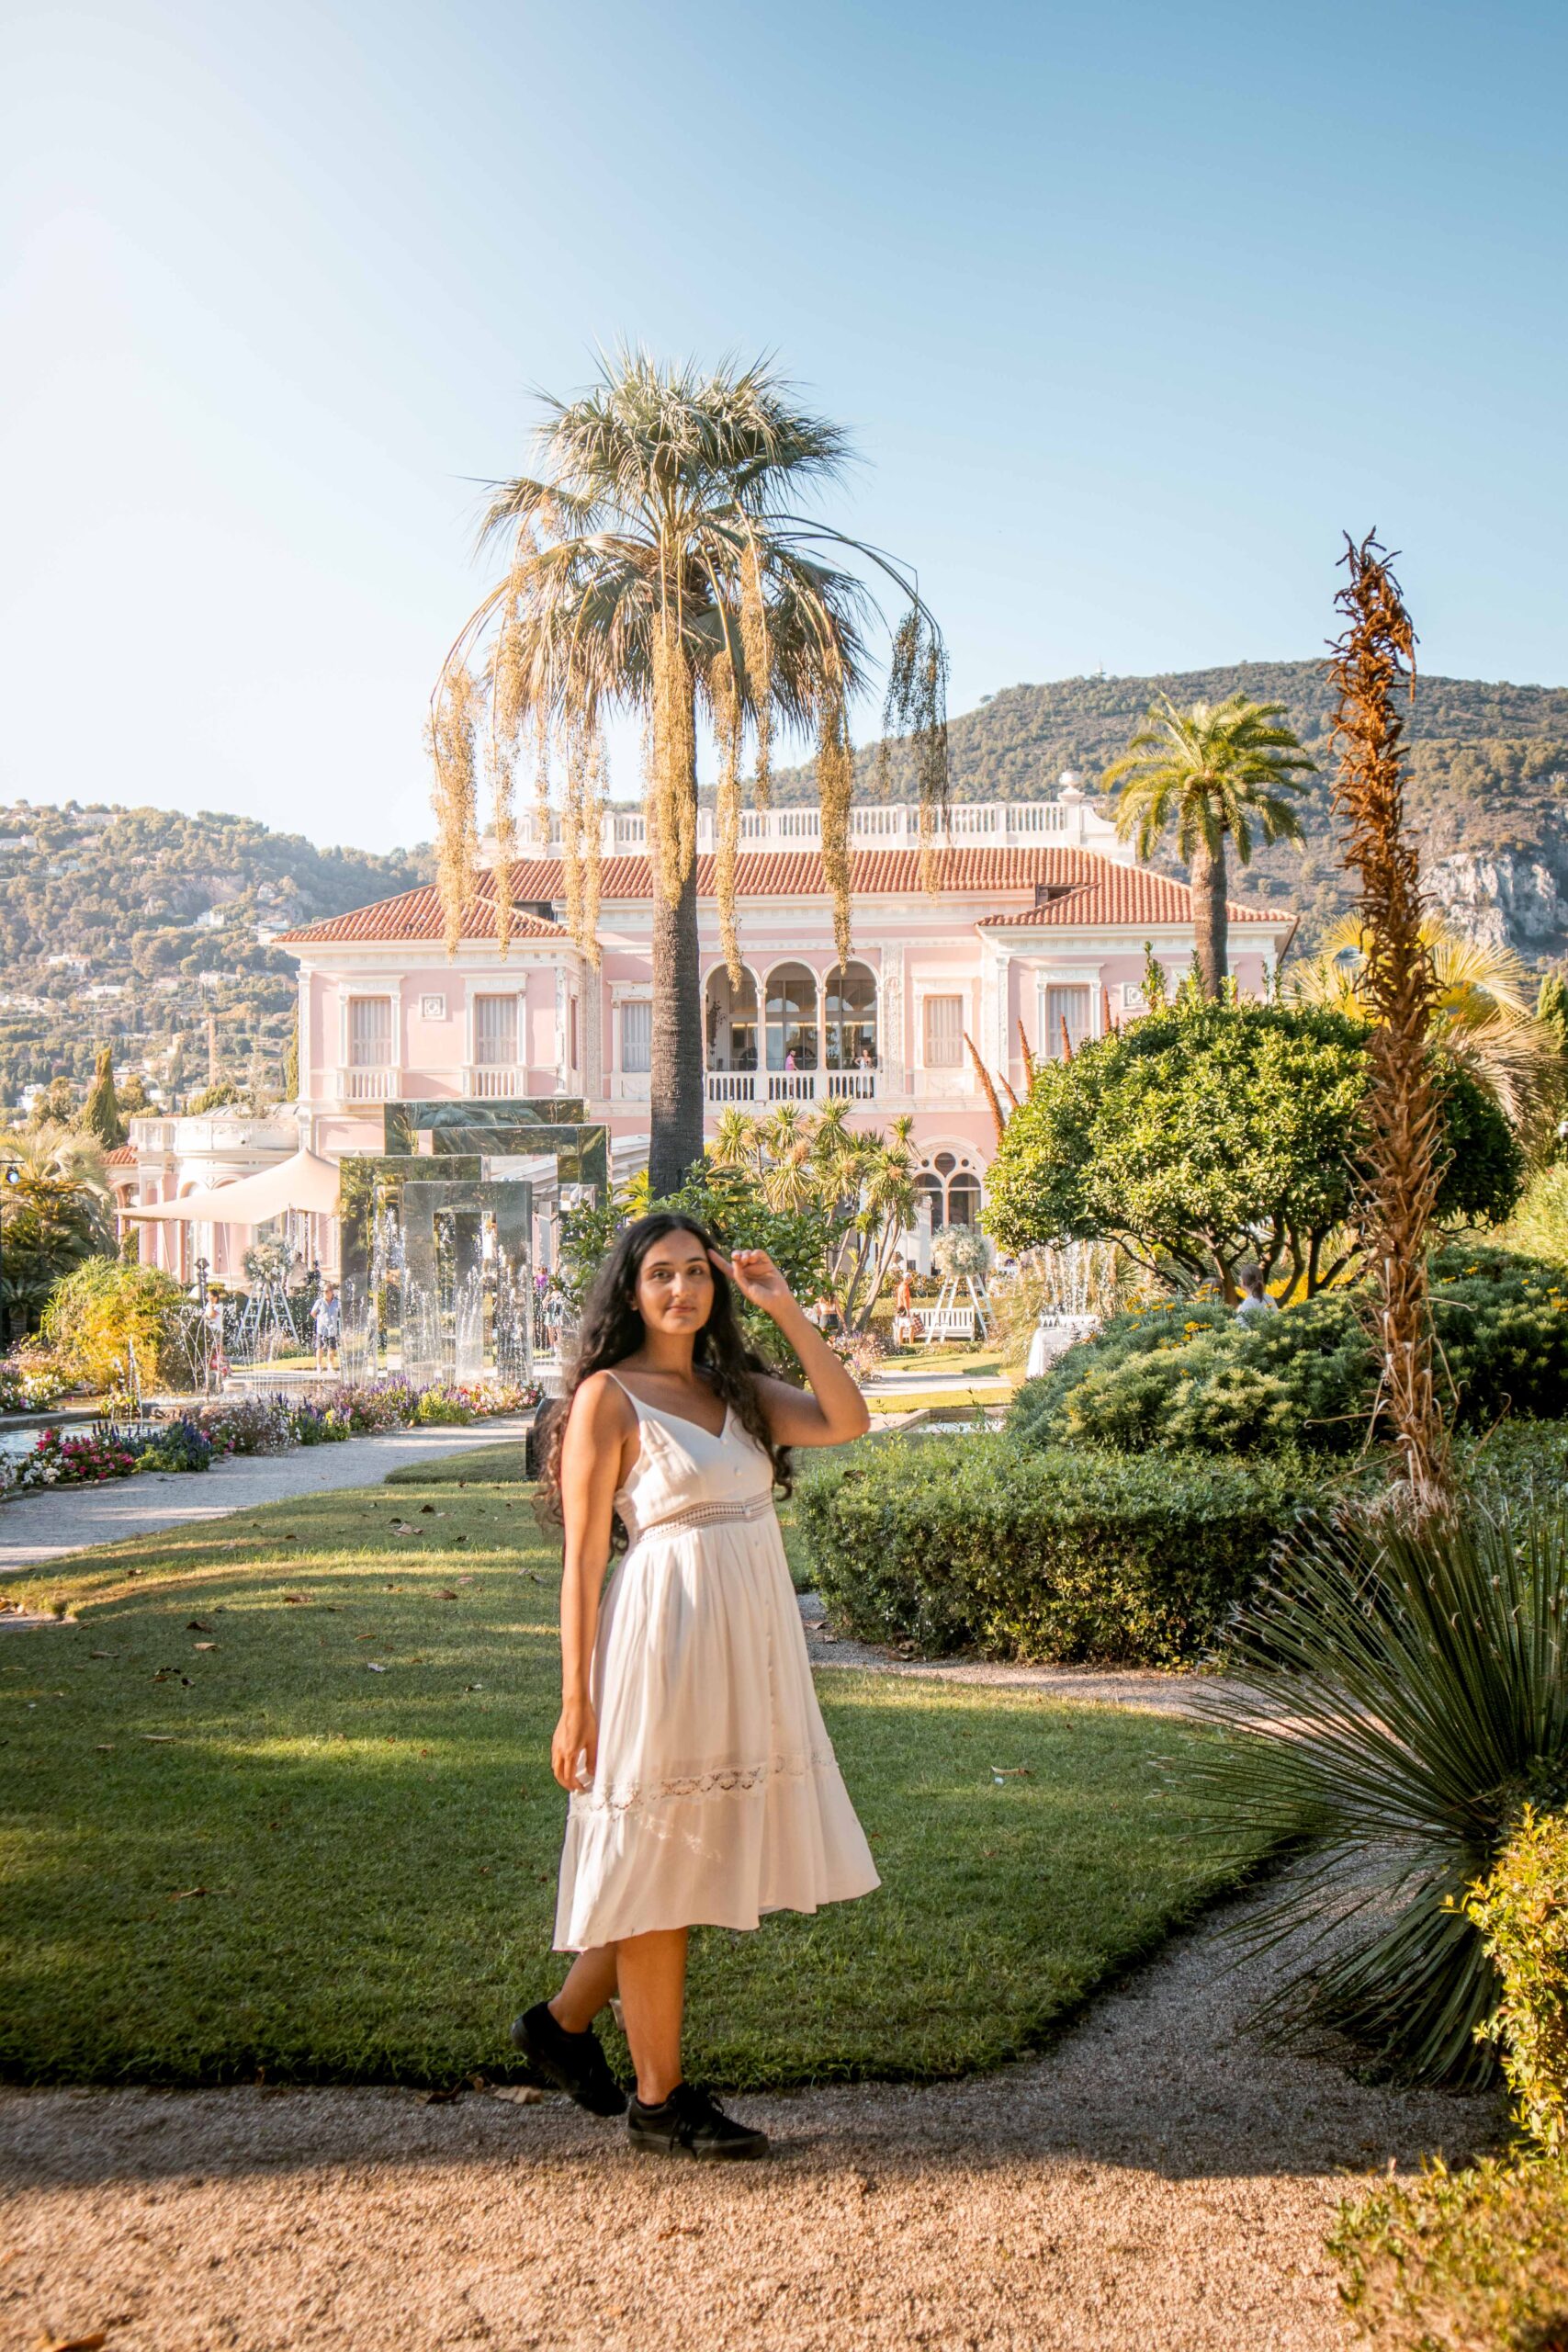 Woman wearing a white dress posing in front of the pink facade of Villa Ephrussi de Rothschild in the French Garden in Saint-Jean-Cap-Ferrat, France